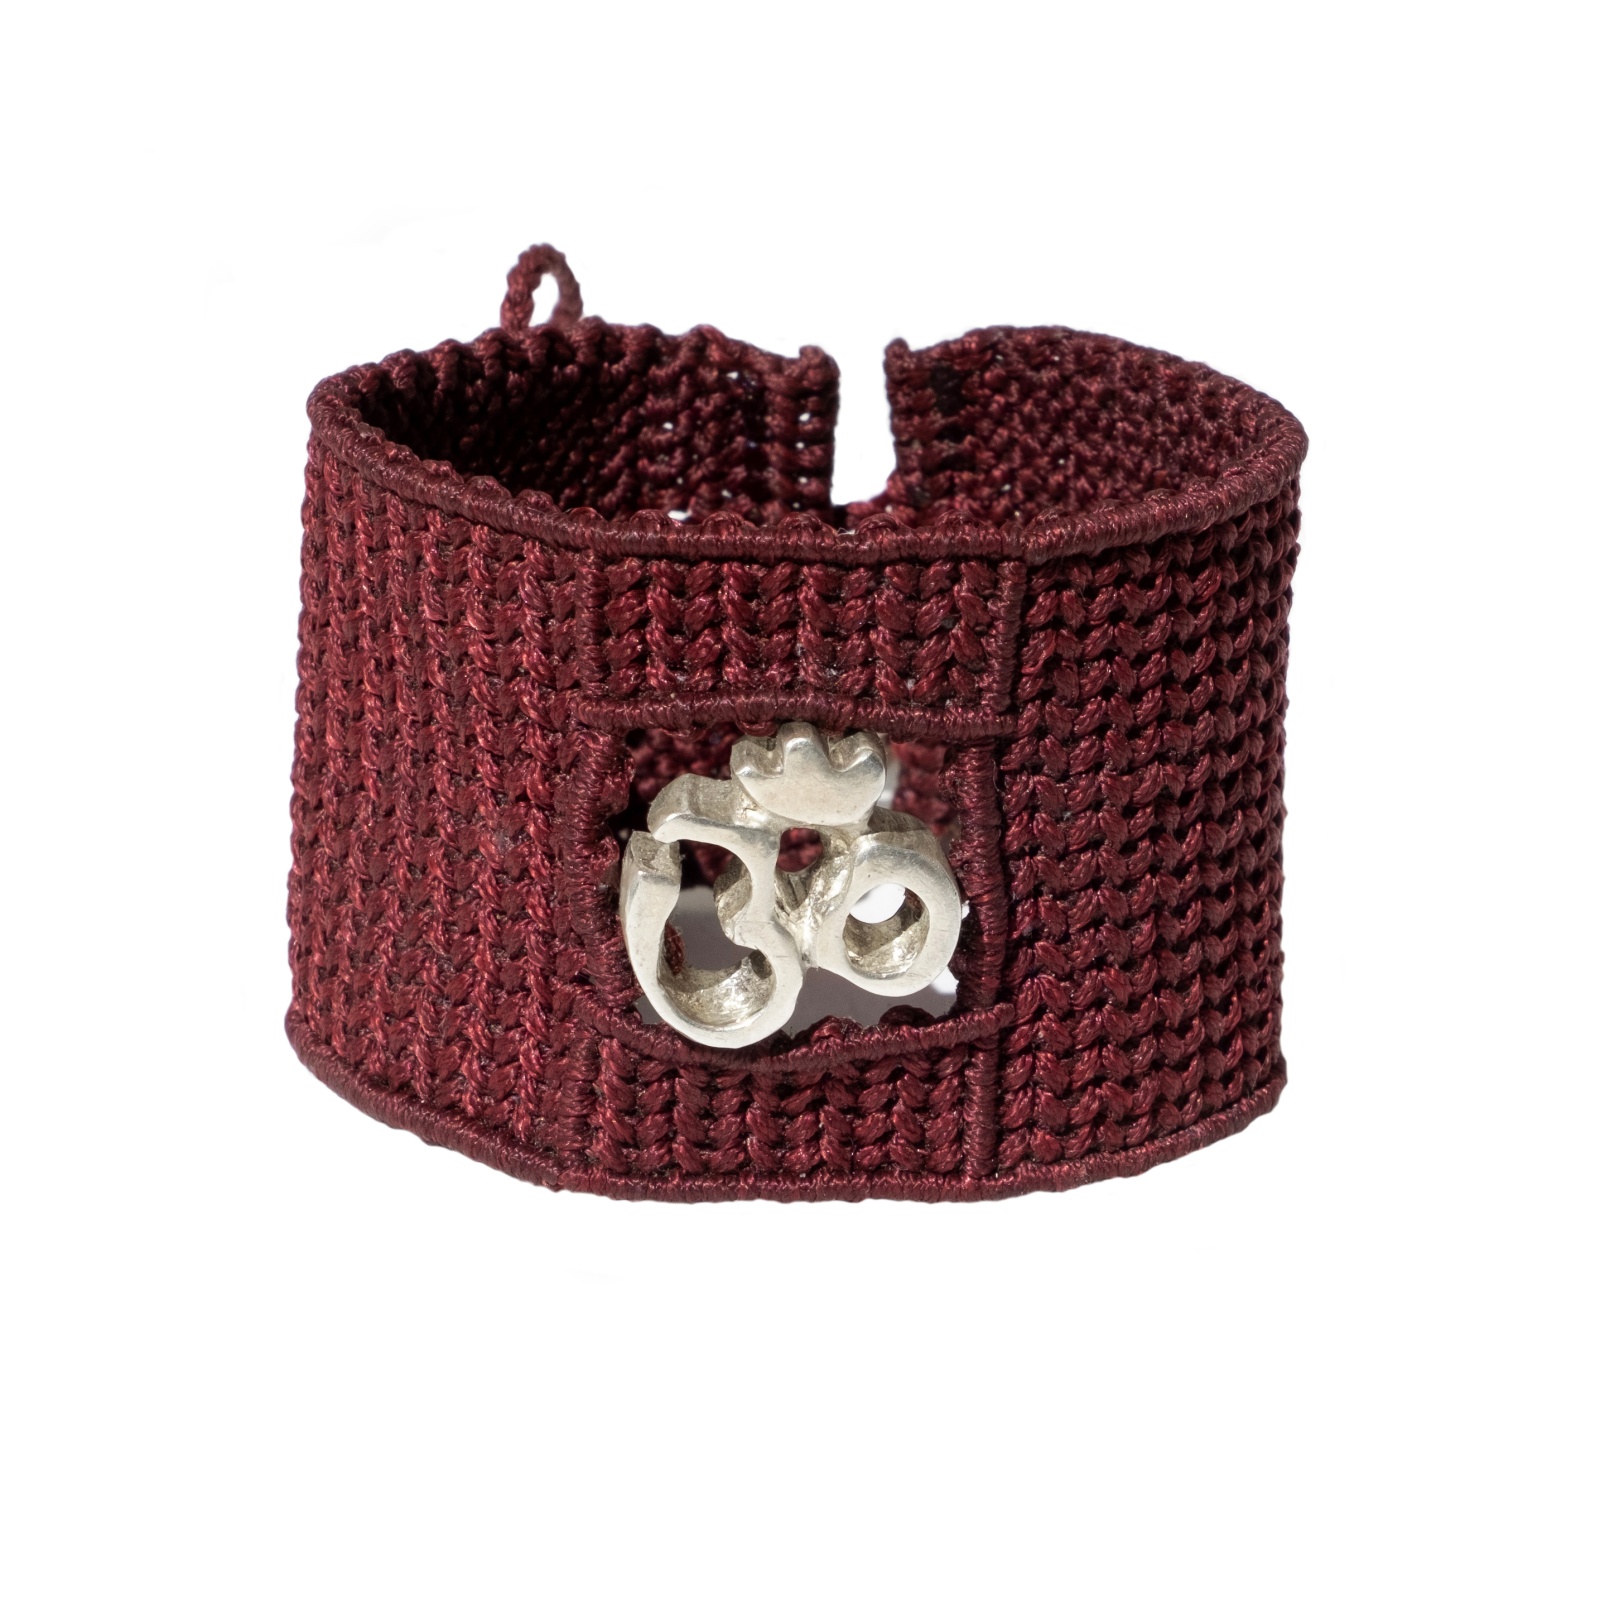 Bold Om Cuff - €330
Free Shipping

In stock ready for shipment

DETAILS
Hand made Macrame
925 Sterling Silver
High Polished Finish
Nickel-free
Handmade
Engraved with Patrizia Casamirra Jewels Logo

